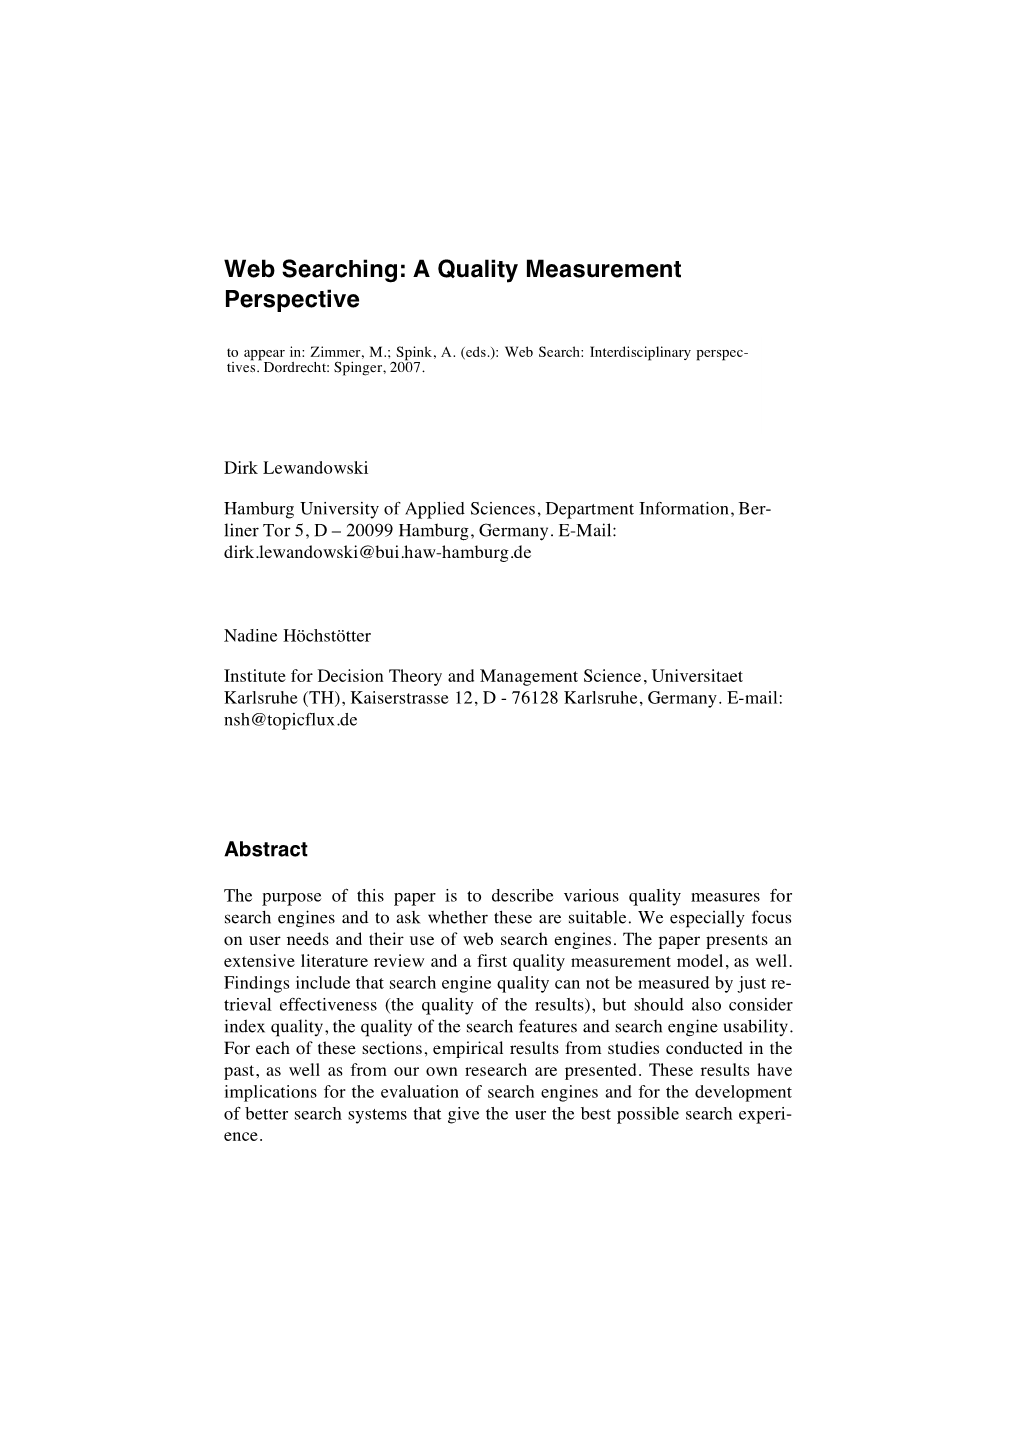 Web Searching: a Quality Measurement Perspective to Appear In: Zimmer, M.; Spink, A